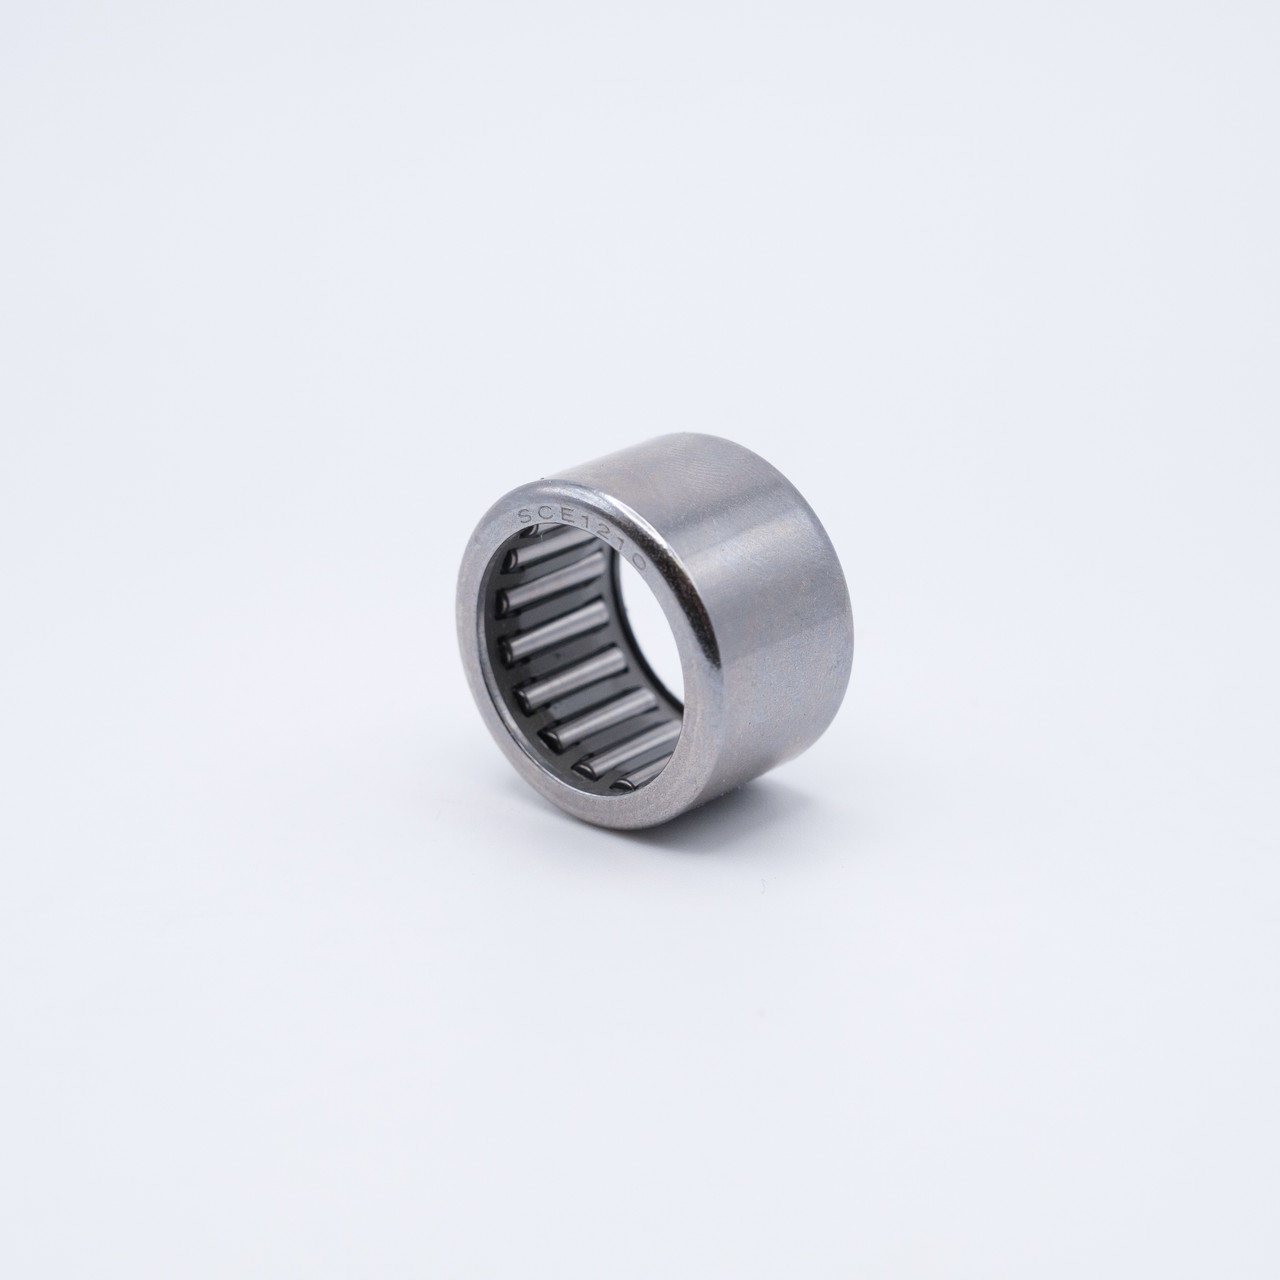 J1612 Needle Roller Bearing 1x1-1/4x3/4 Right Side View